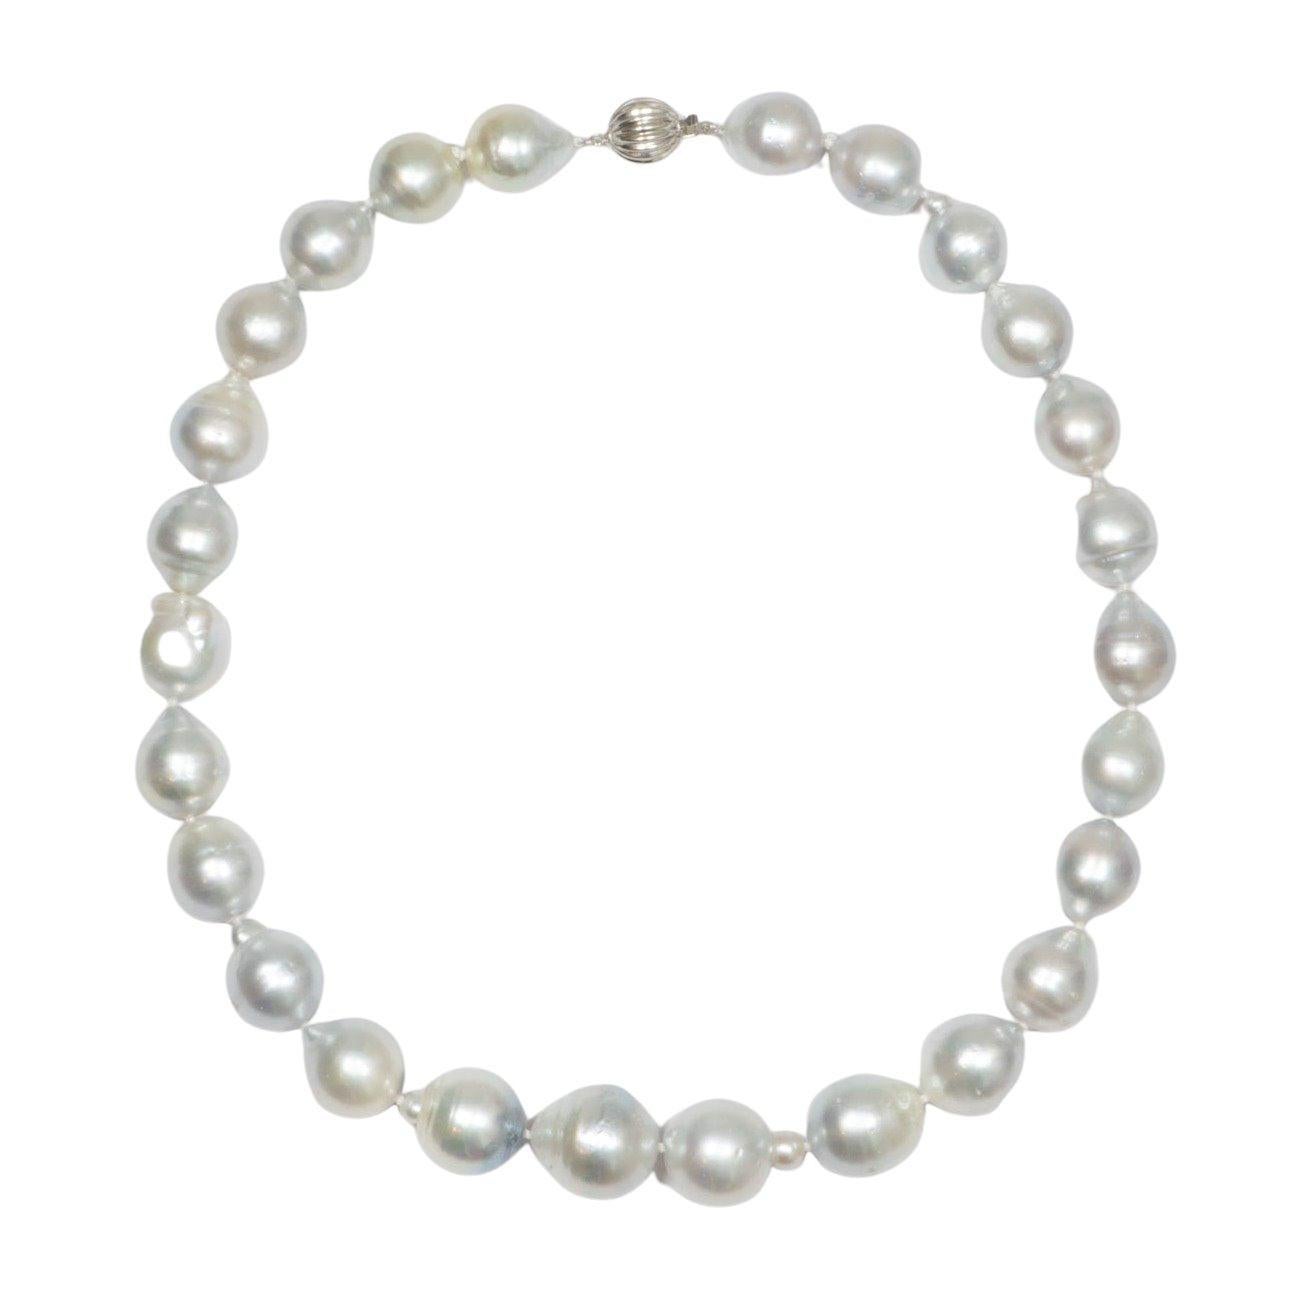 ♥ A South Sea Baroque Pearl hand knotted necklace with 14k white gold components

♥ The item measures 17: in length

♥ All stone(s) used are genuine, earth-mined, and guaranteed conflict free! As is with anything that is naturally occurring, our